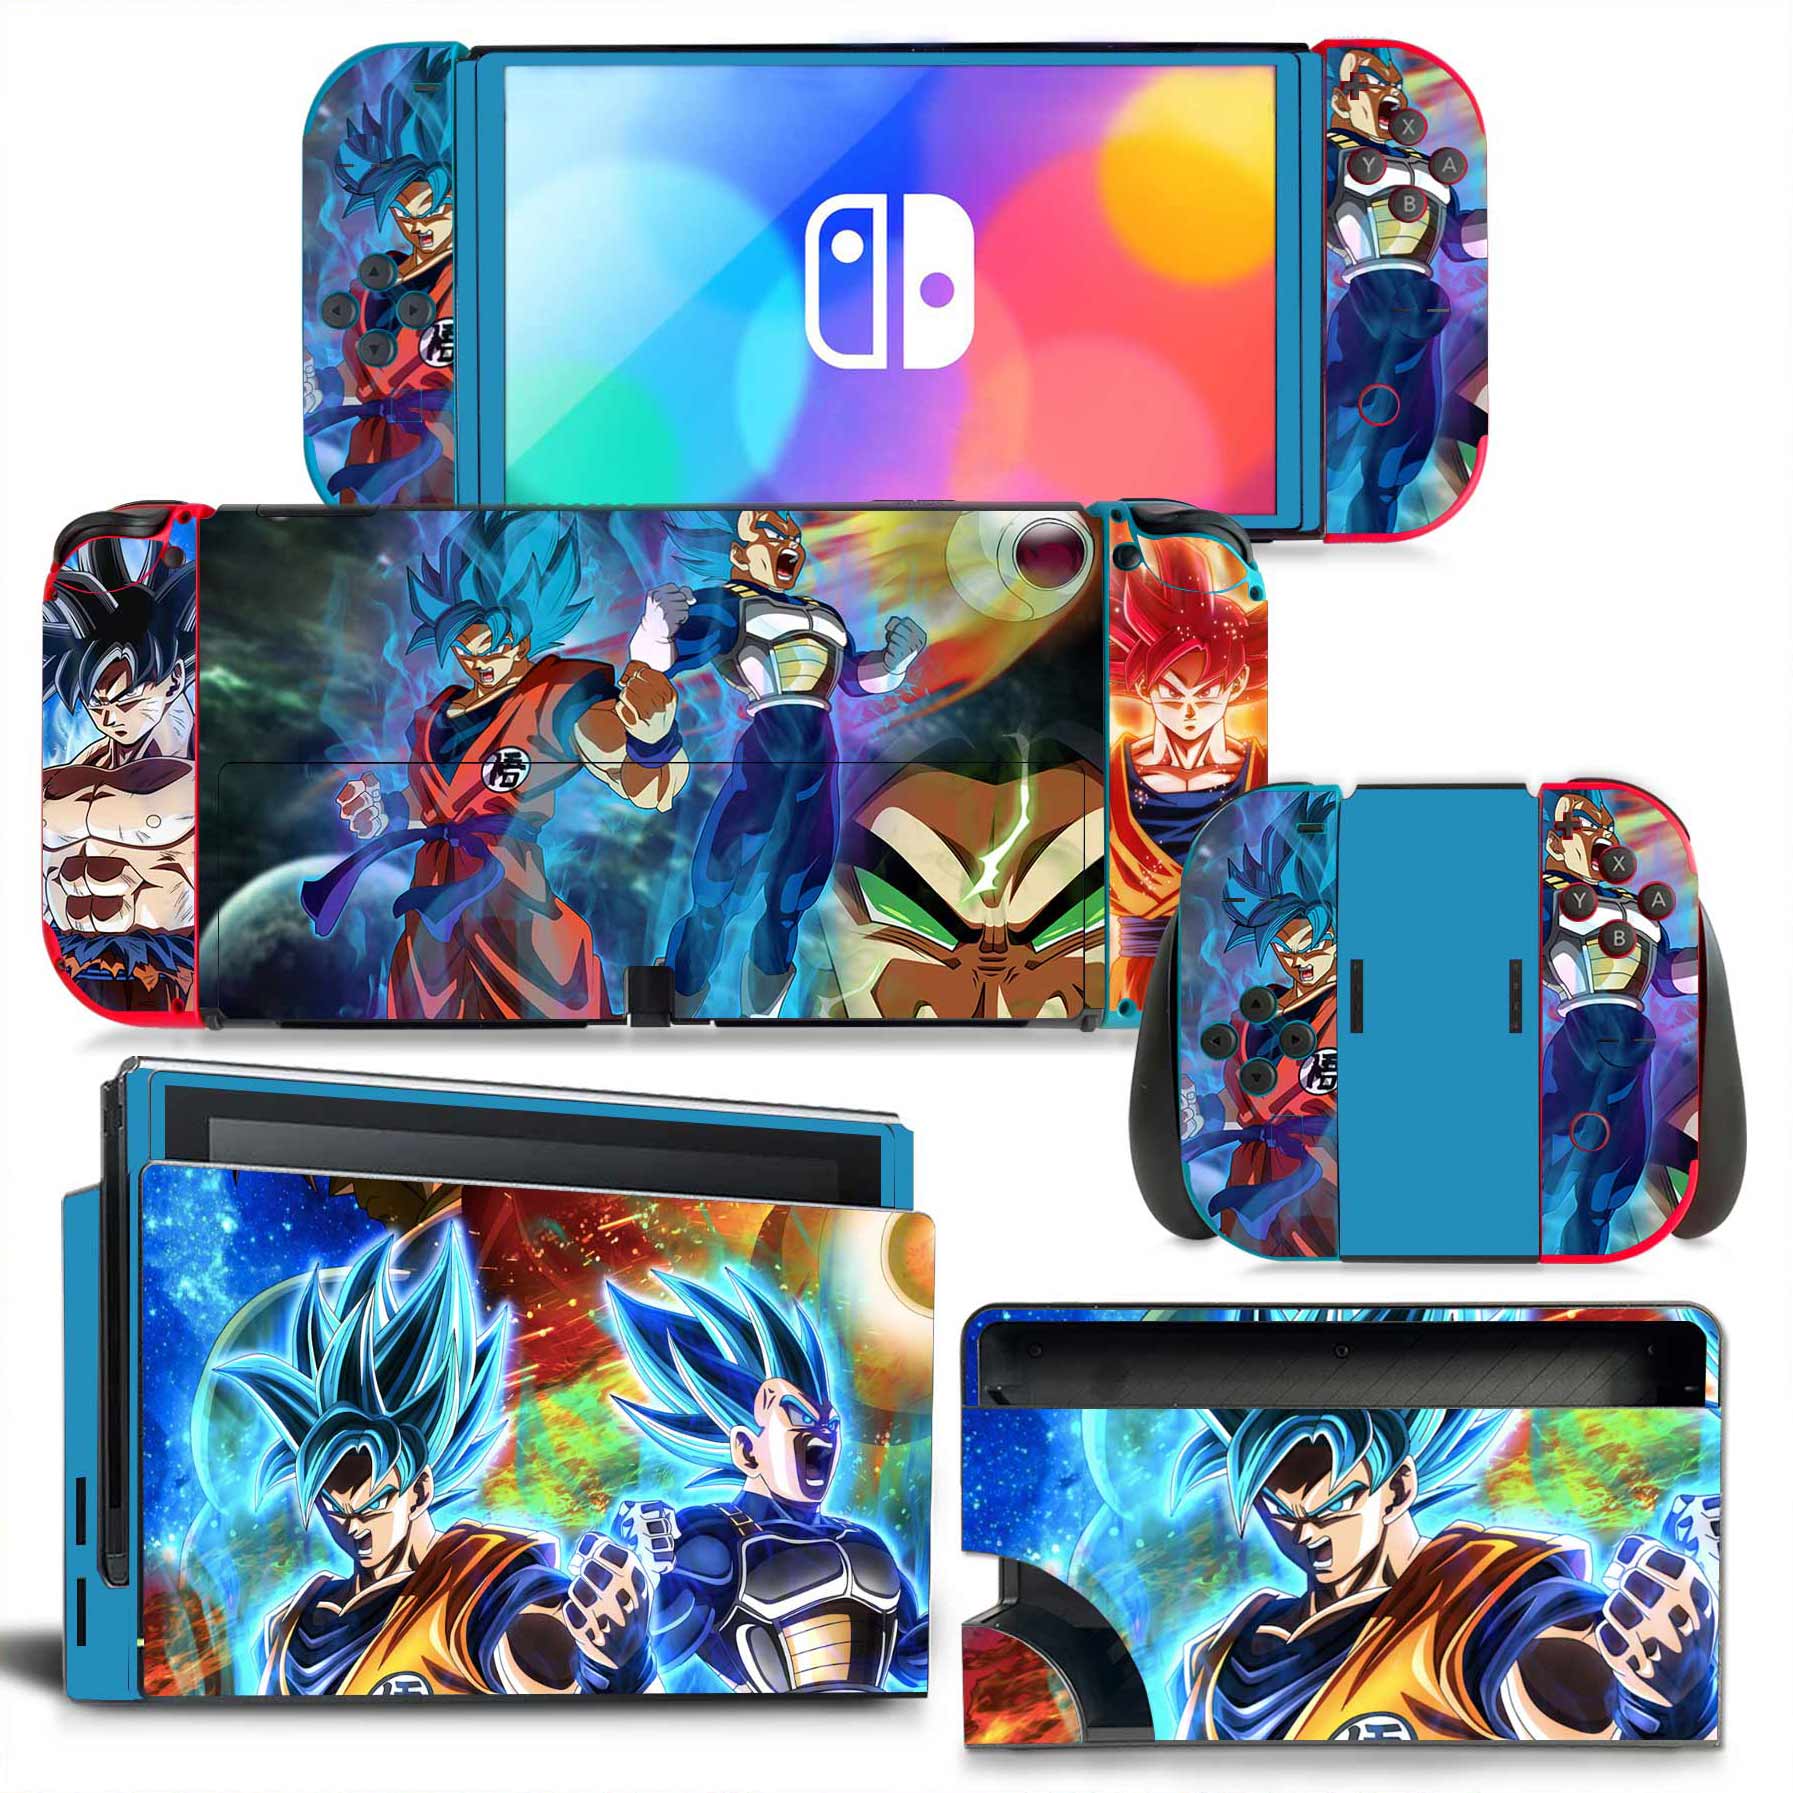 Anime Nintendo Switch Sticker Protective Cover 24